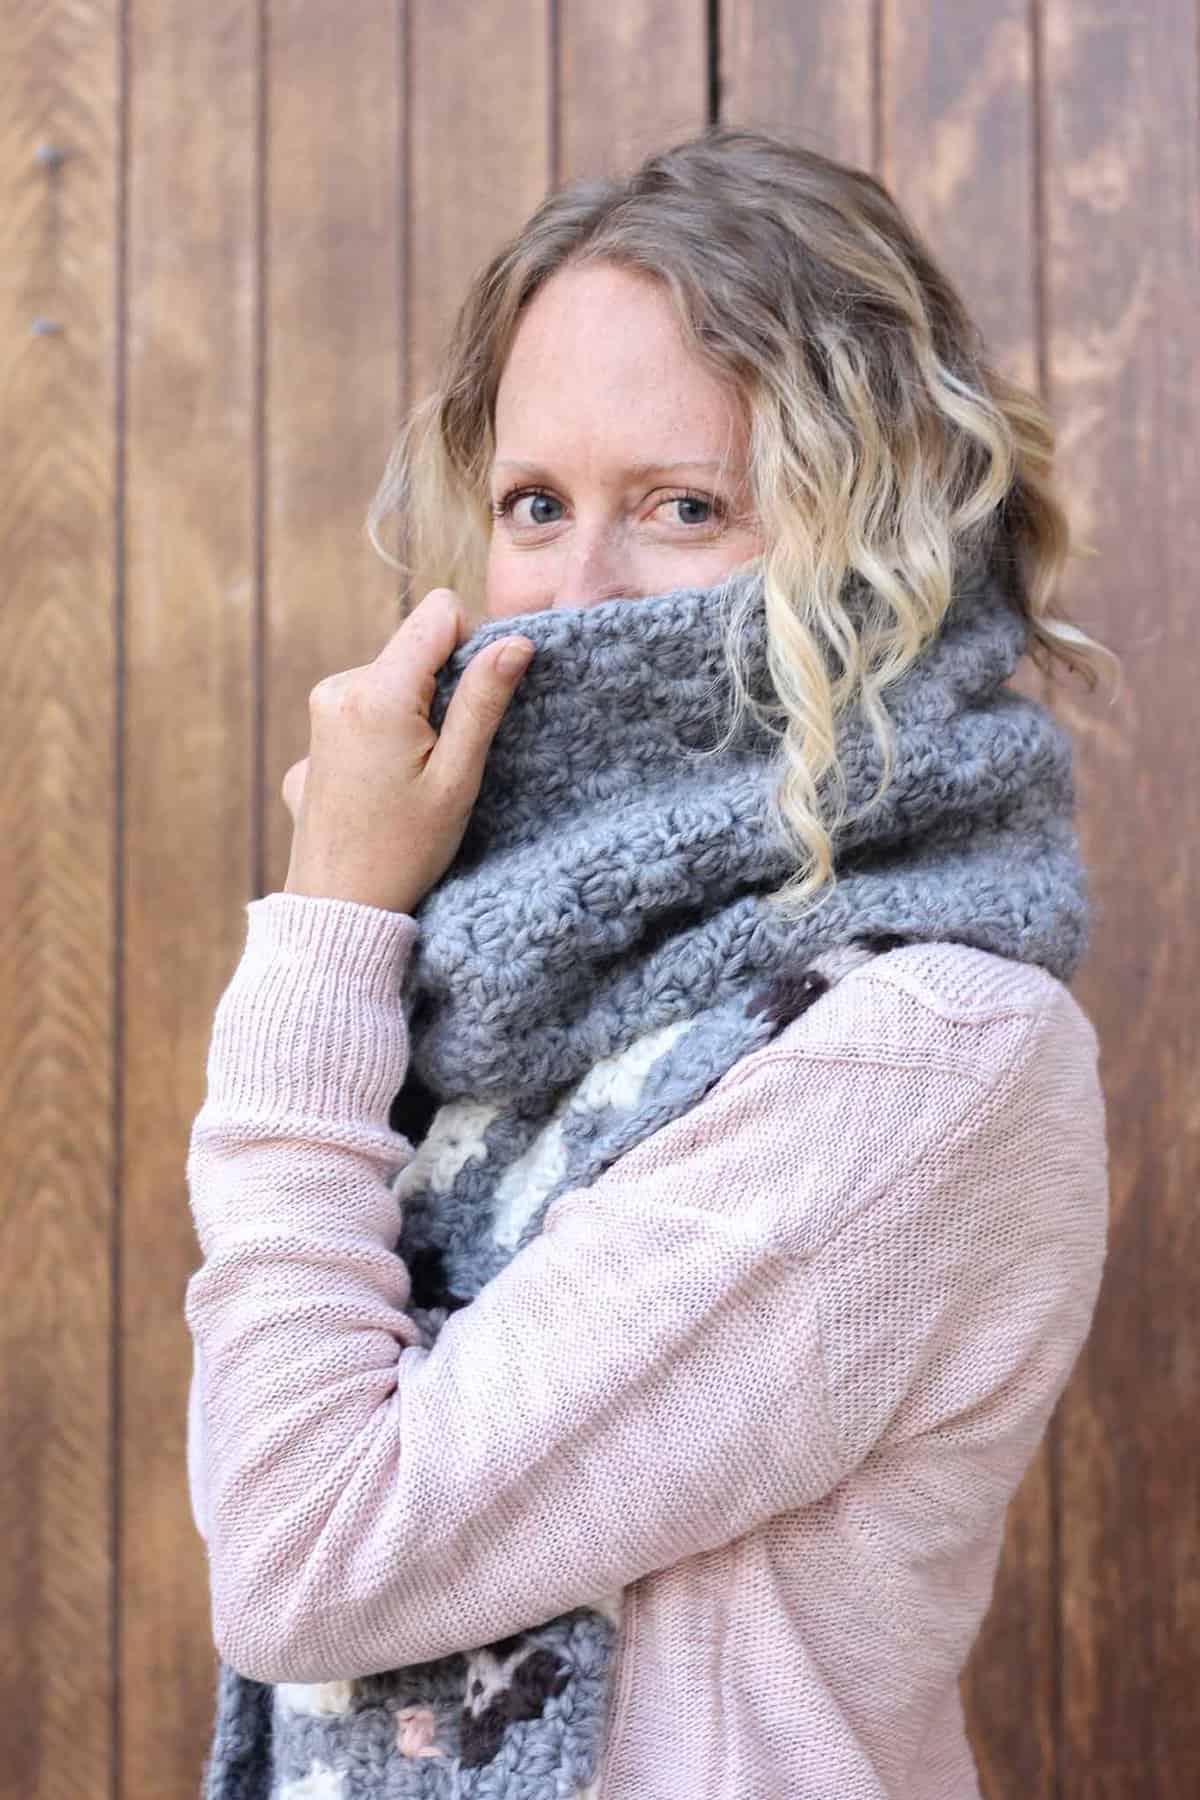 Whether you live in the North Pole or just want to jump on the super scarf trend, this nordic crochet super scarf pattern will keep you feeling warm, but lookin' hot all winter long. Click to download the free c2c graph pattern.